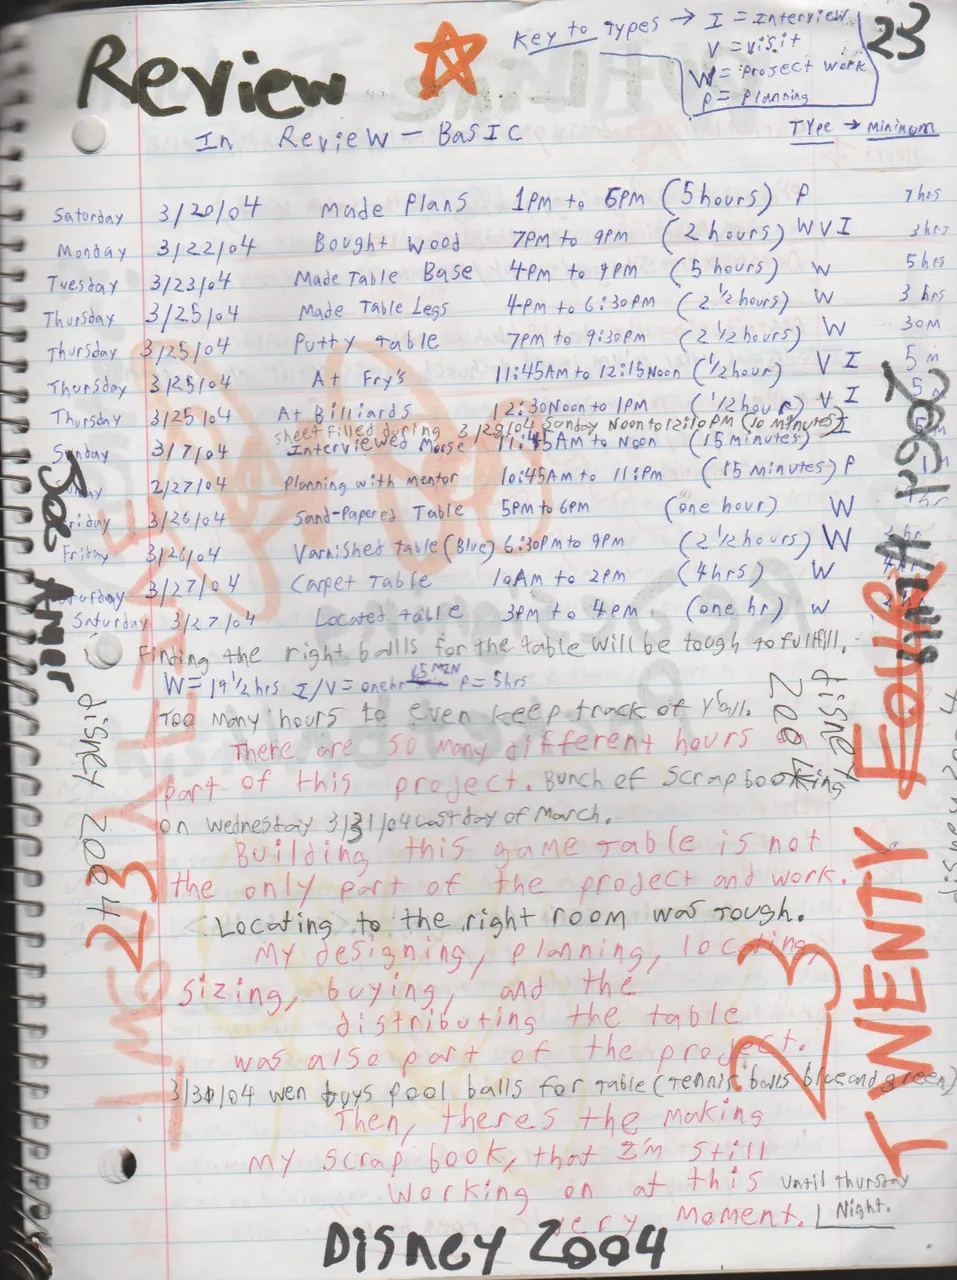 2004-01-29 - Thursday - Carpetball FGHS Senior Project Journal, Joey Arnold, Part 02, 96pages numbered, Notebook-18.png